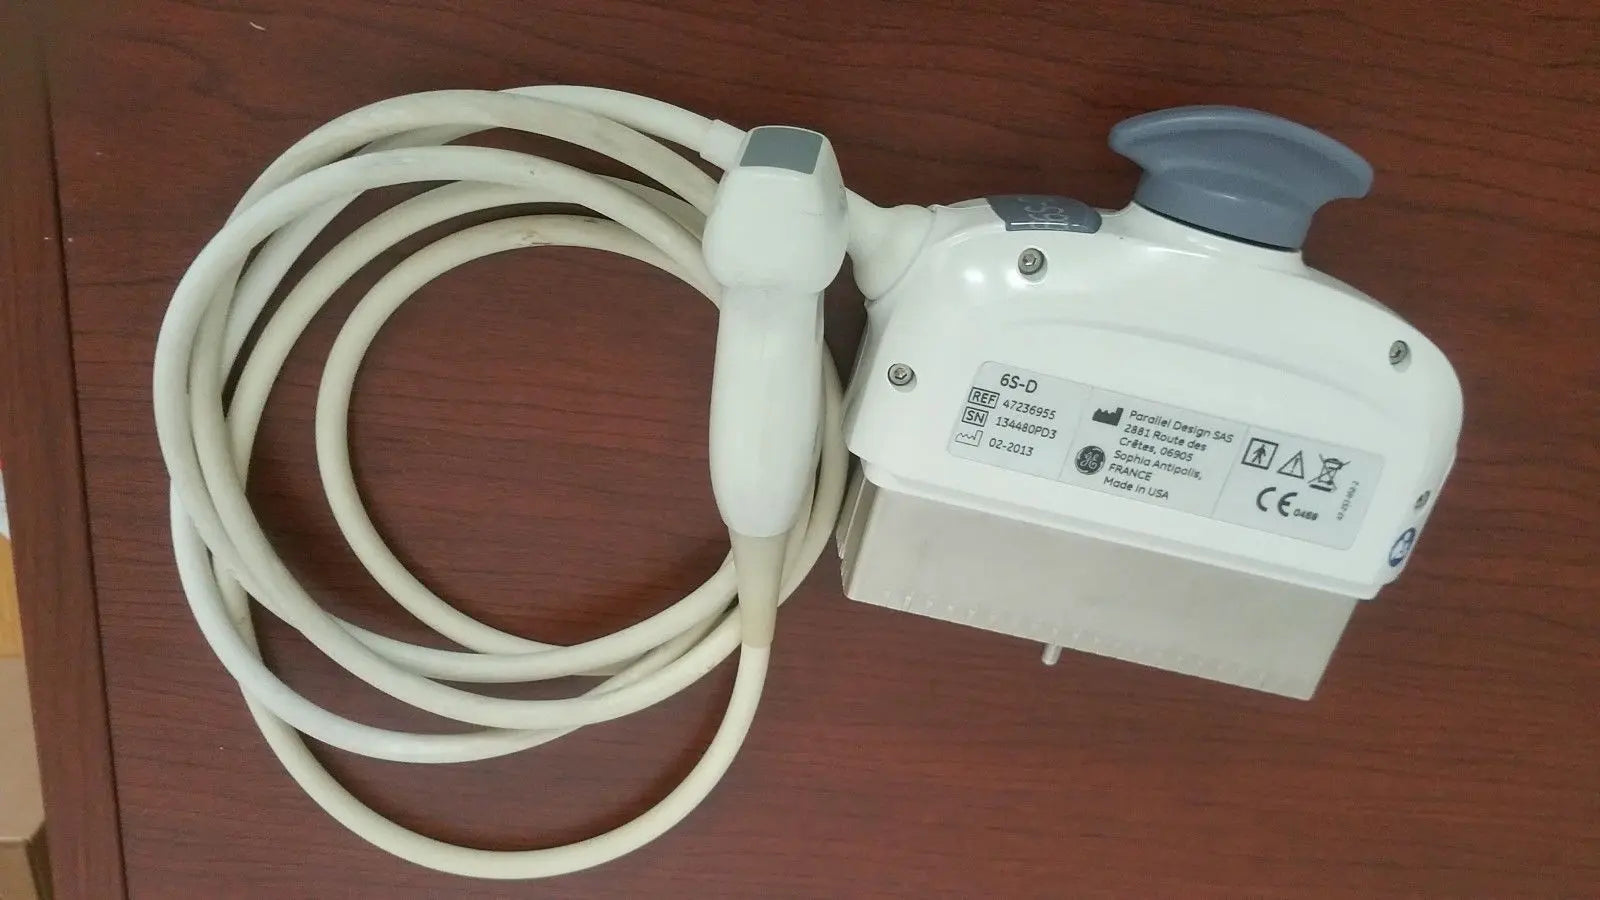 GE 6SD Probe Ultrasound Transducer DIAGNOSTIC ULTRASOUND MACHINES FOR SALE